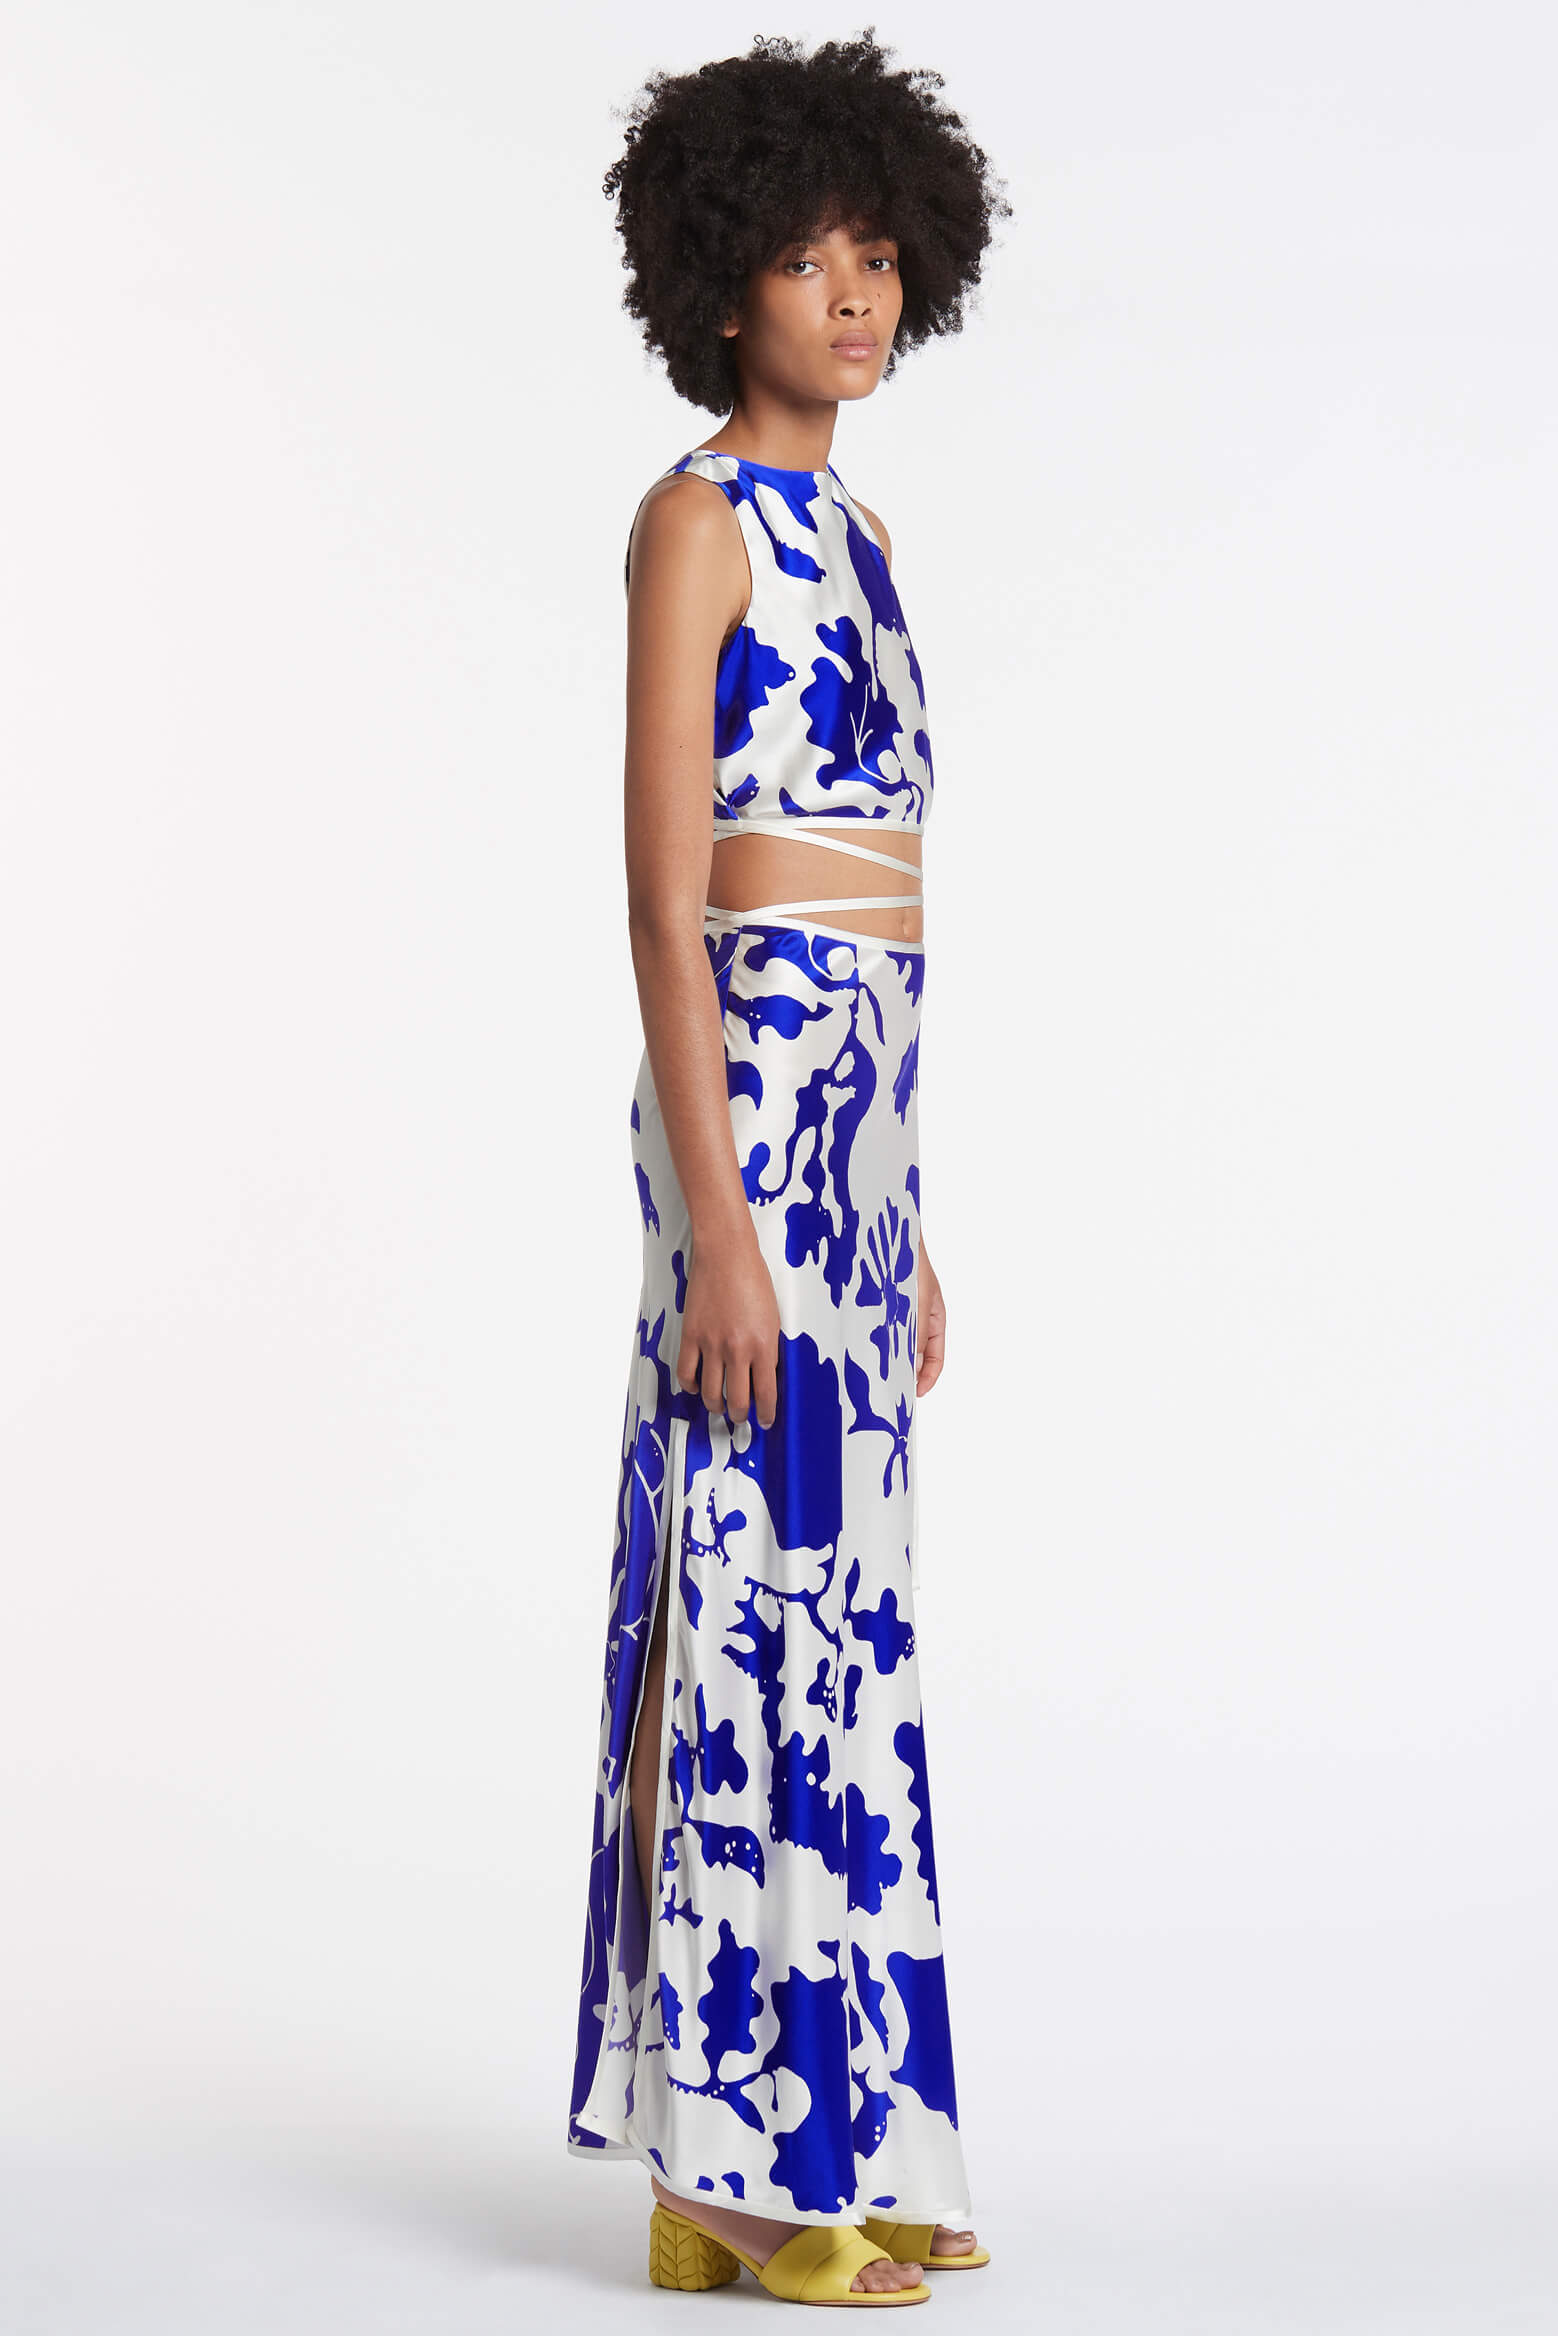 Sir Esme Deconstructed Top in Abstract Blue from The New Trend